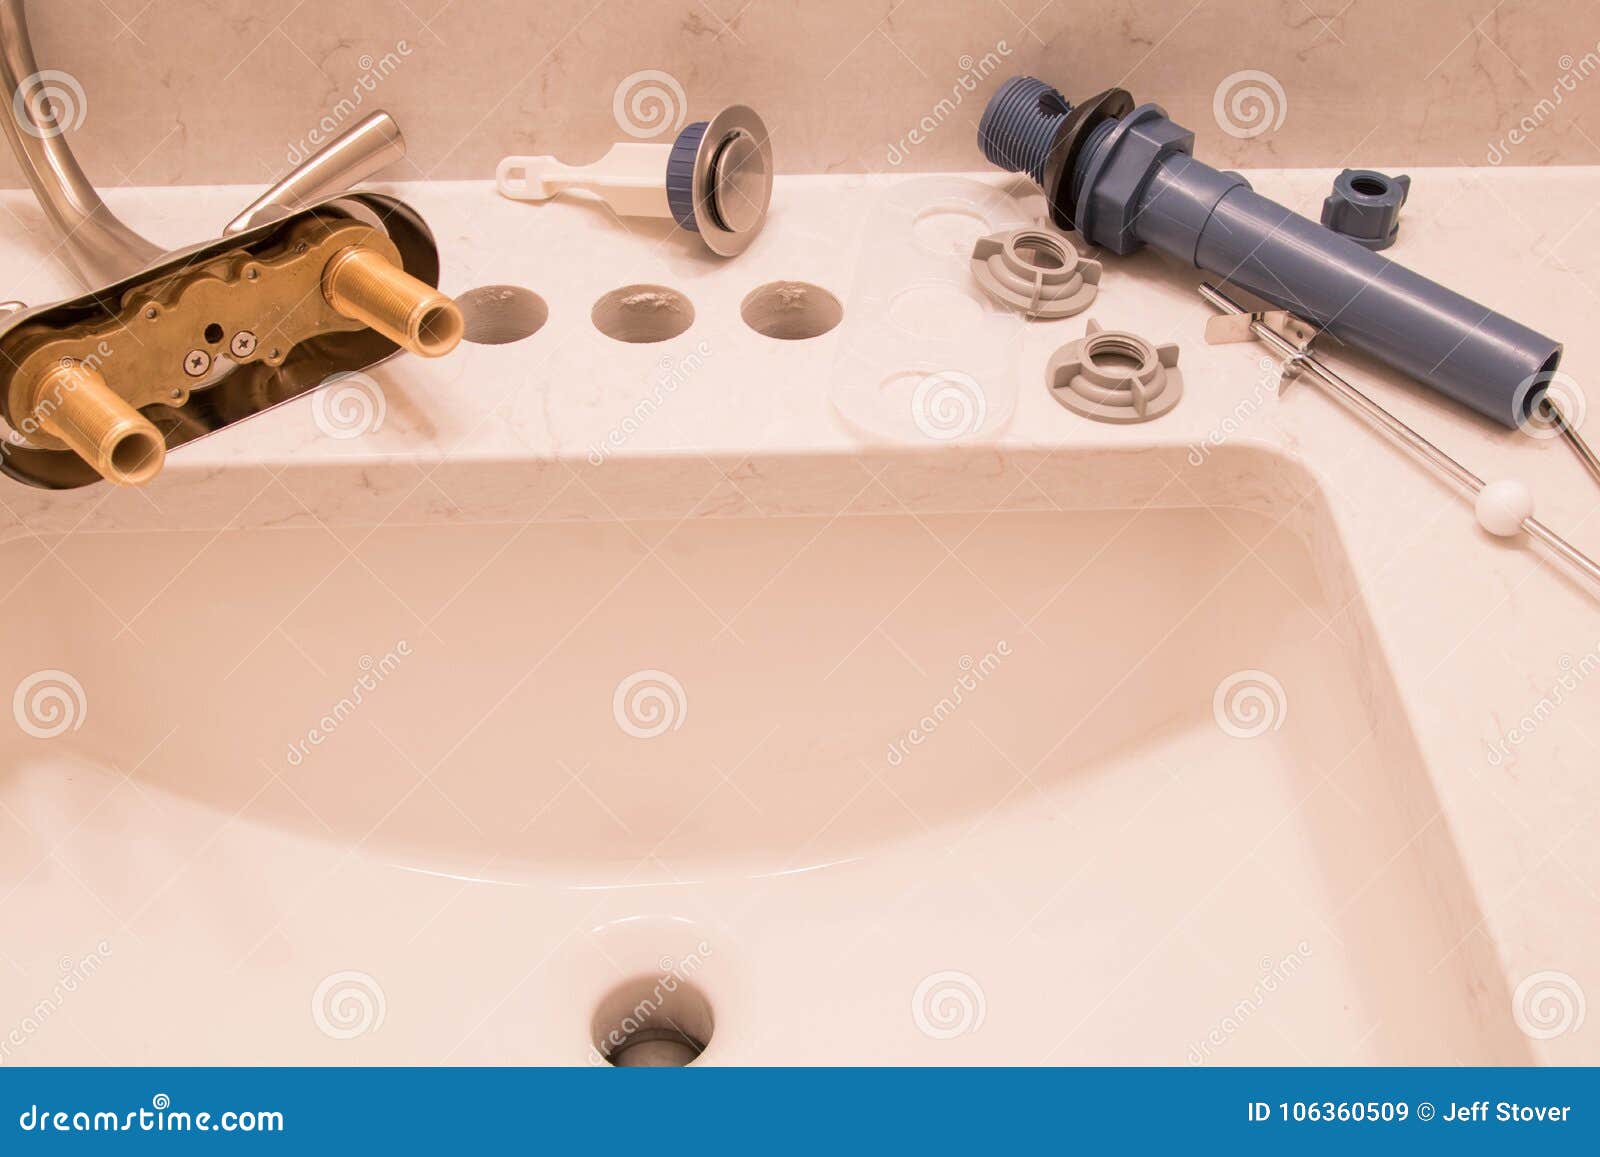 Bathroom Faucet And Drain Ready For Installation Stock Image